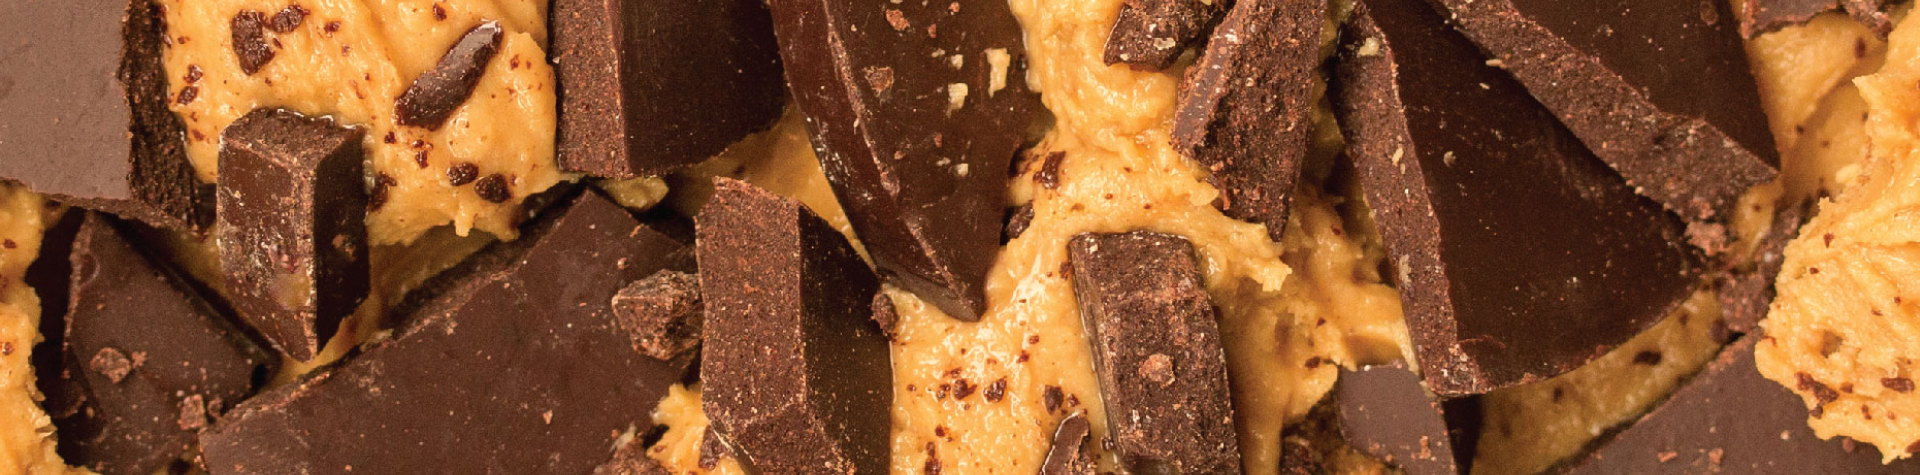 chunks of chocolate in creamy peanut butter